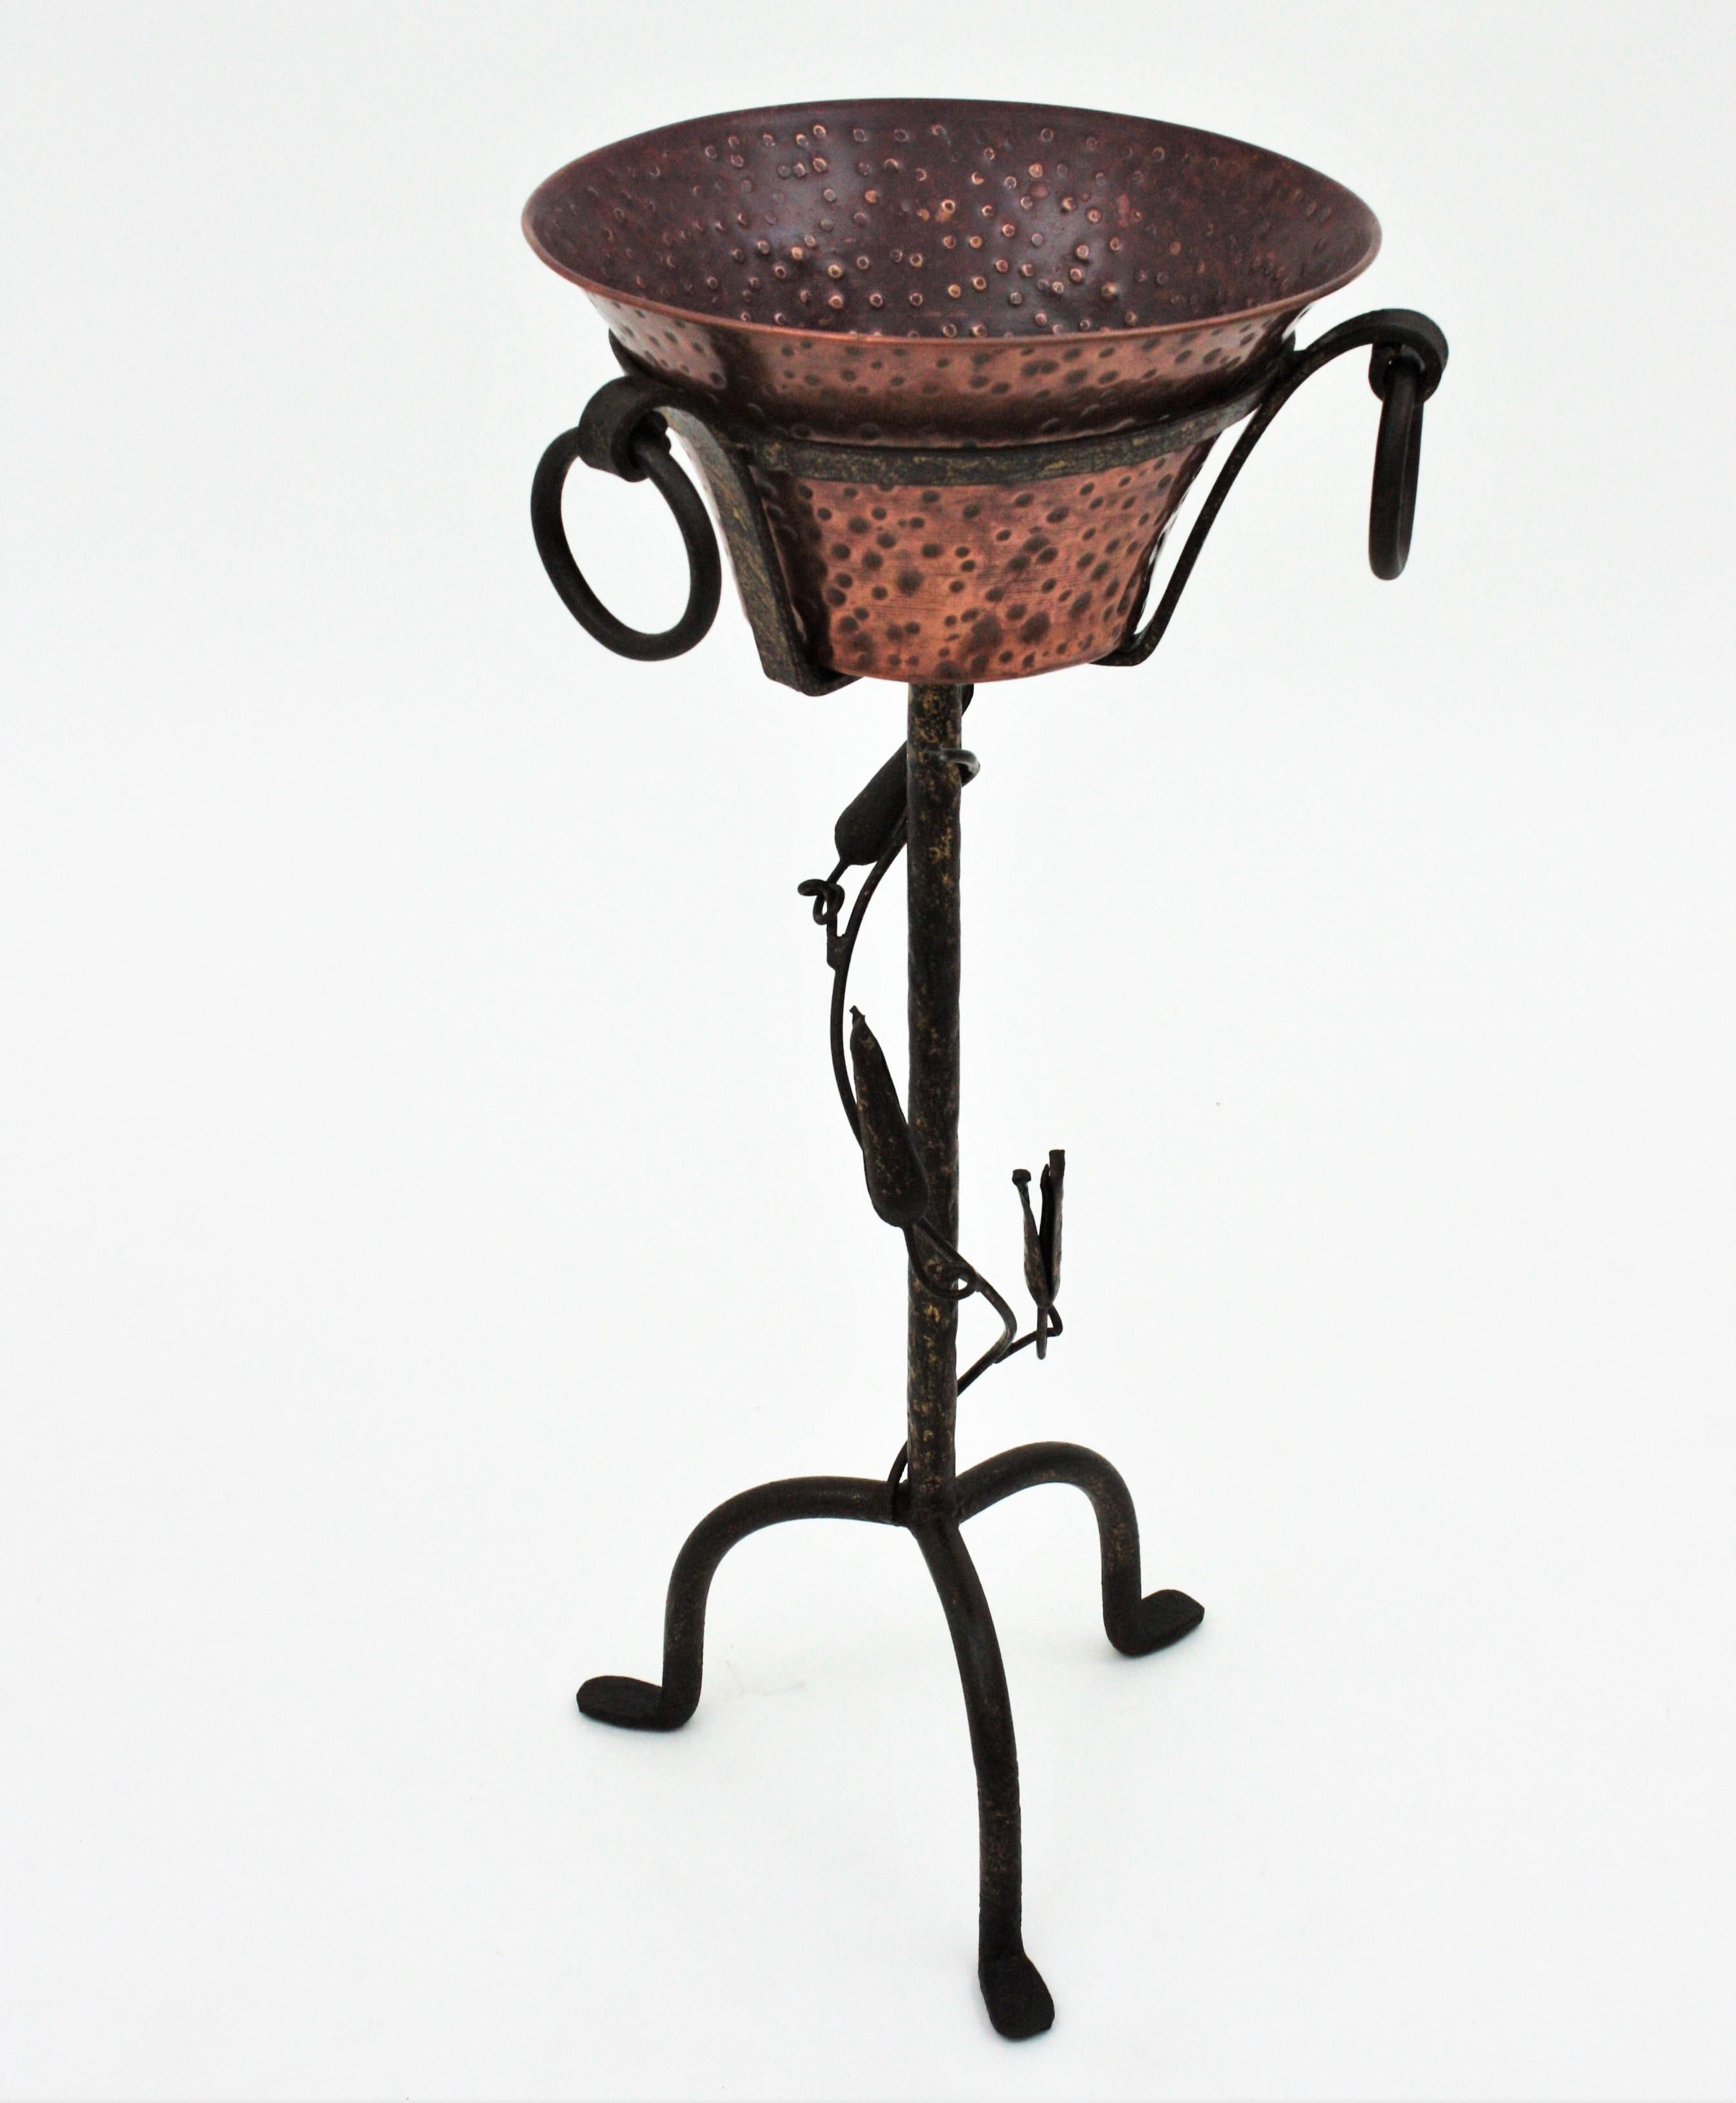 Spanish Champagne or Wine Cooler Stand Serving Bucket in Hand Forged Iron and Copper